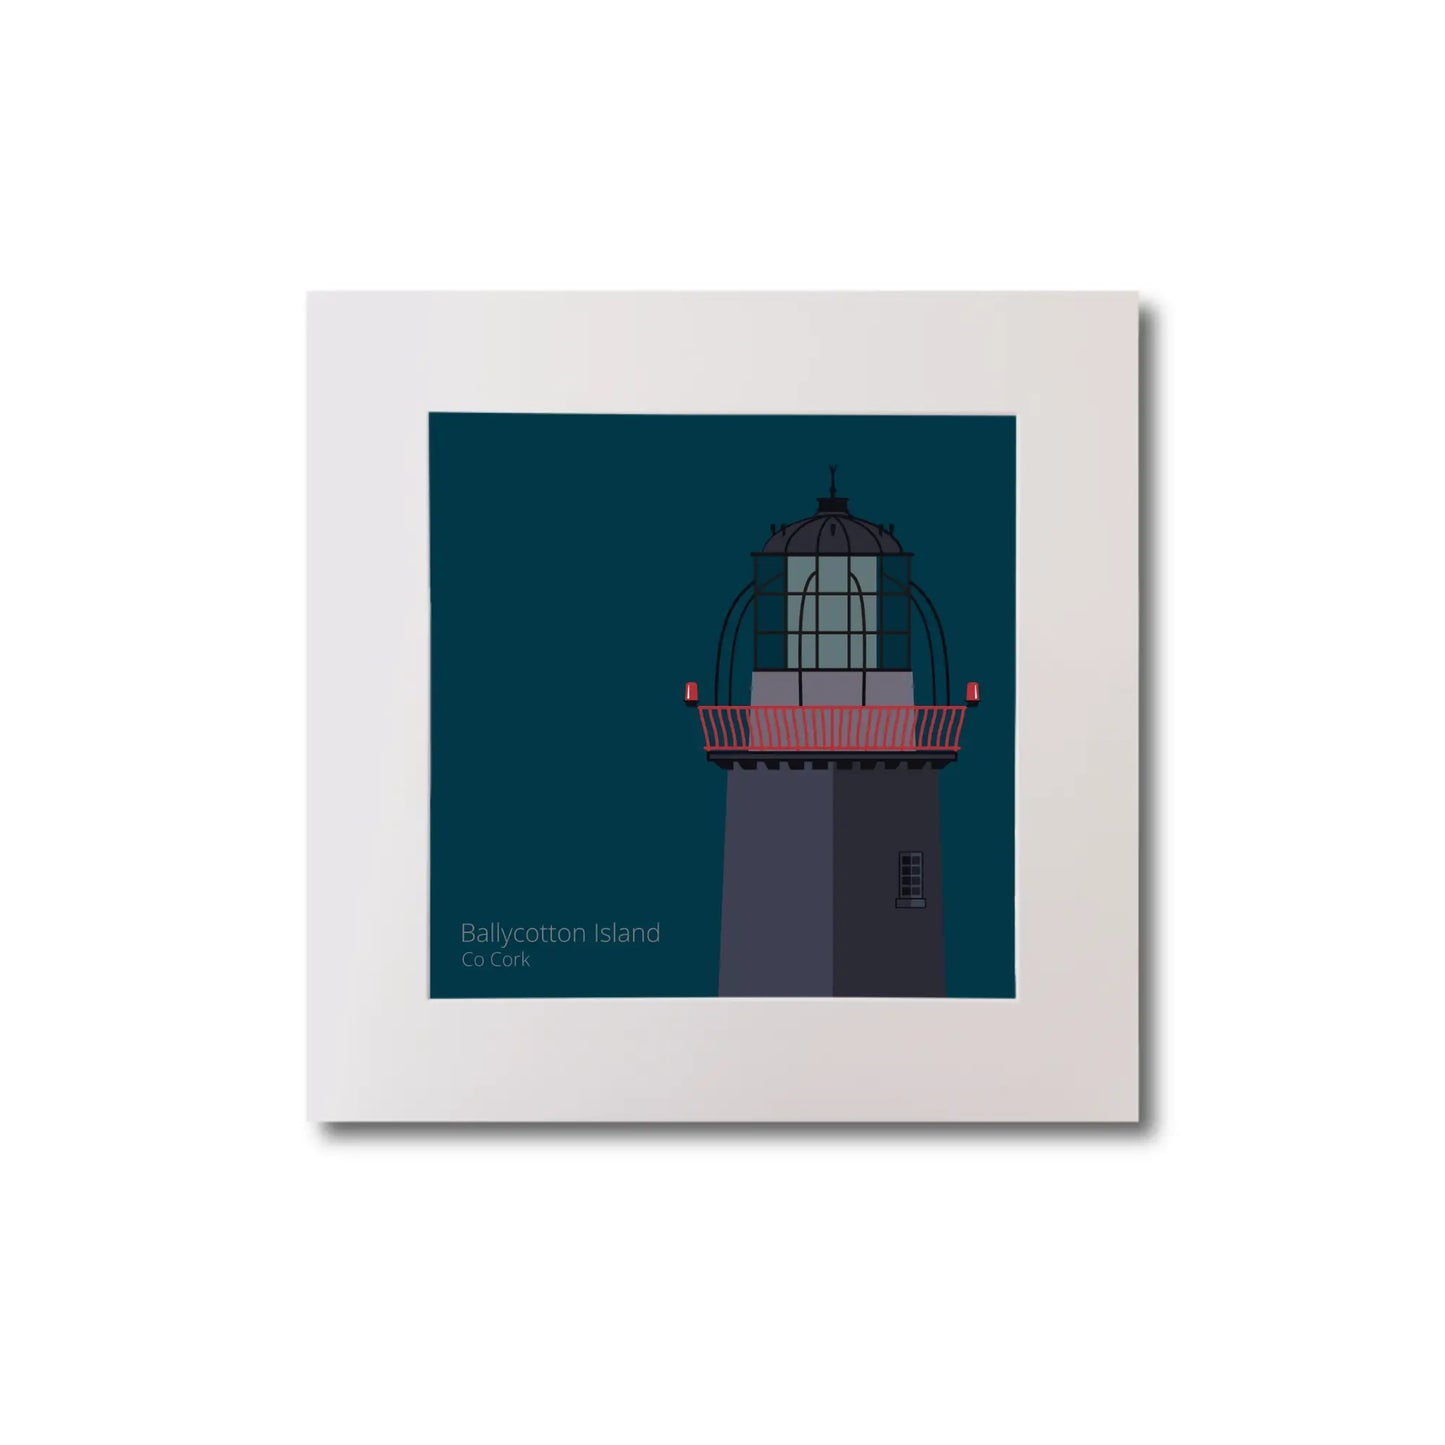 Illustration of Ballycotton lighthouse on a midnight blue background, mounted and measuring 20x20cm.